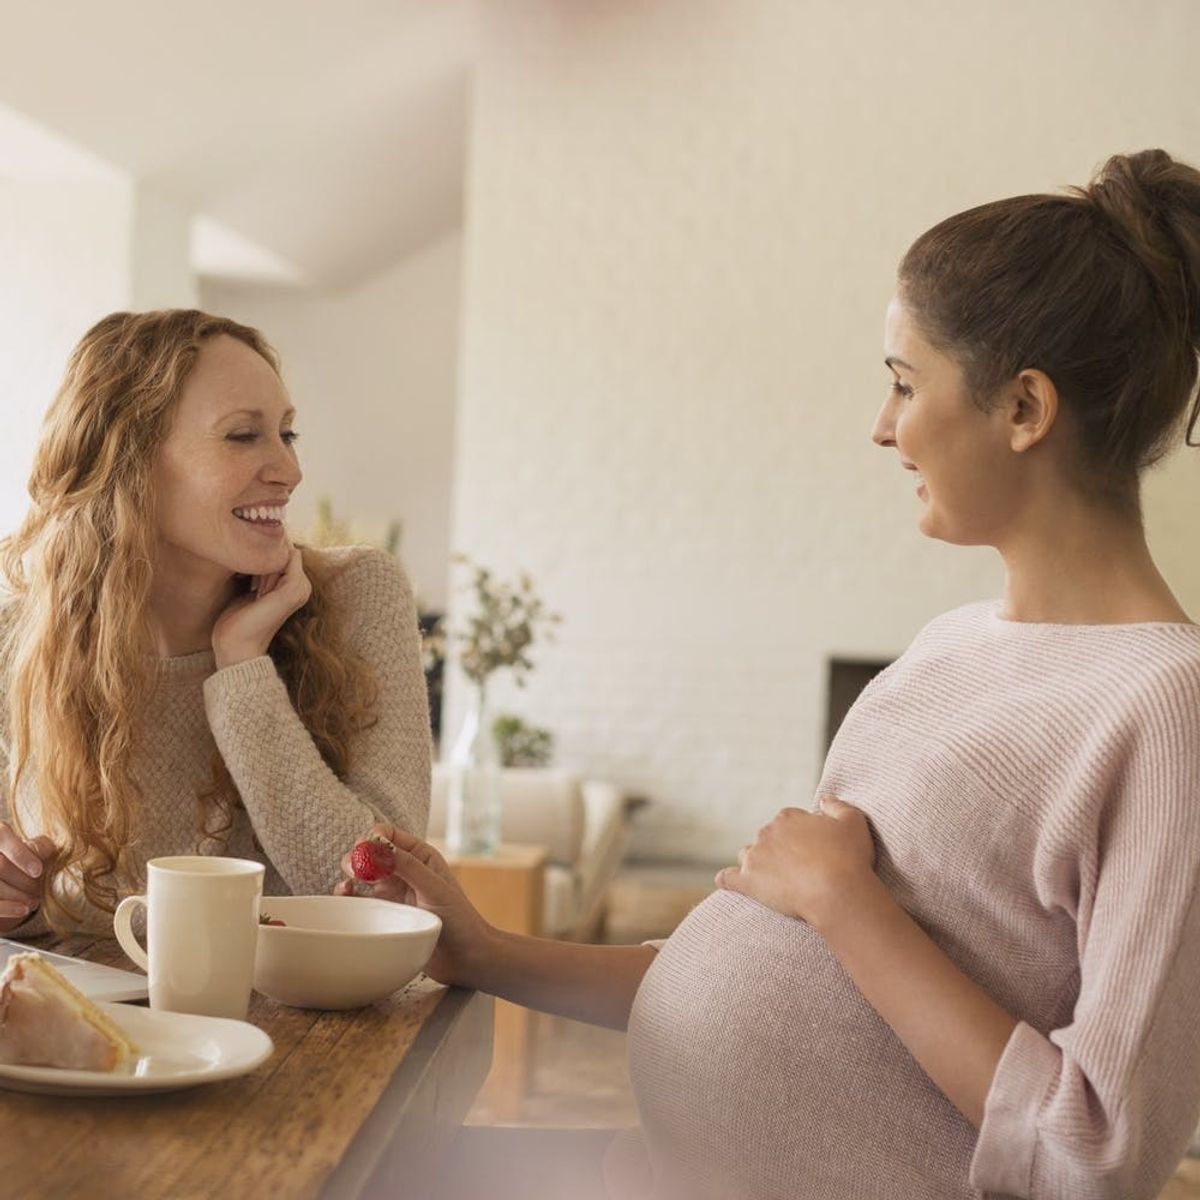 8 Ways to Support a Friend Who’s Putting Her Baby Up for Adoption